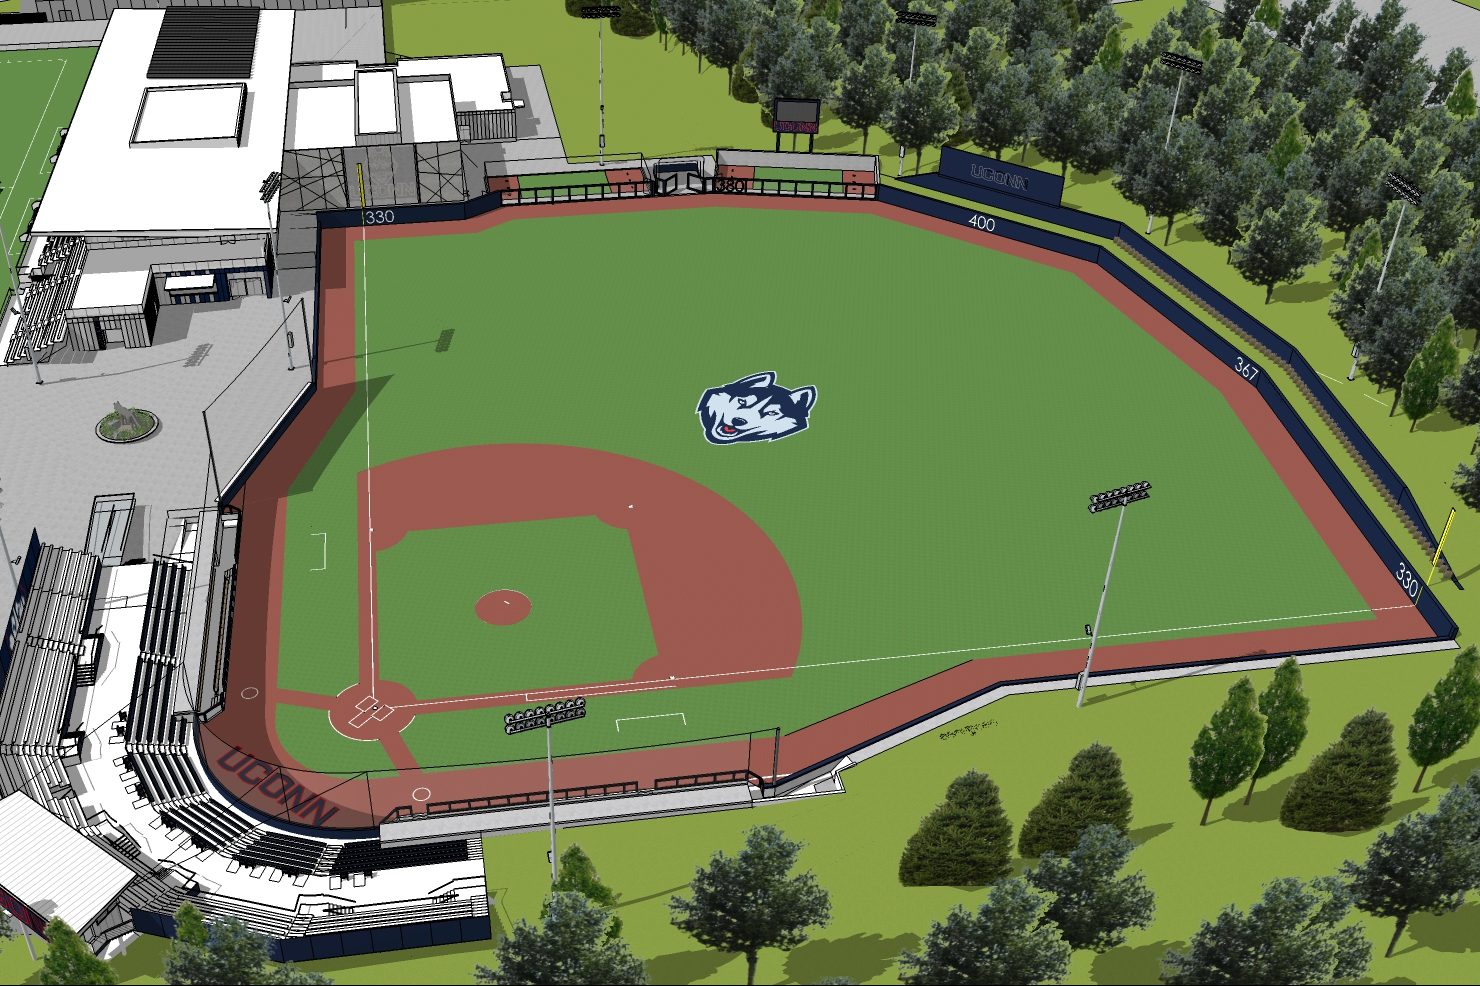 A design of the Elliot Ballpark, the new 1,500-seat facility scheduled to open in the spring of 2020.